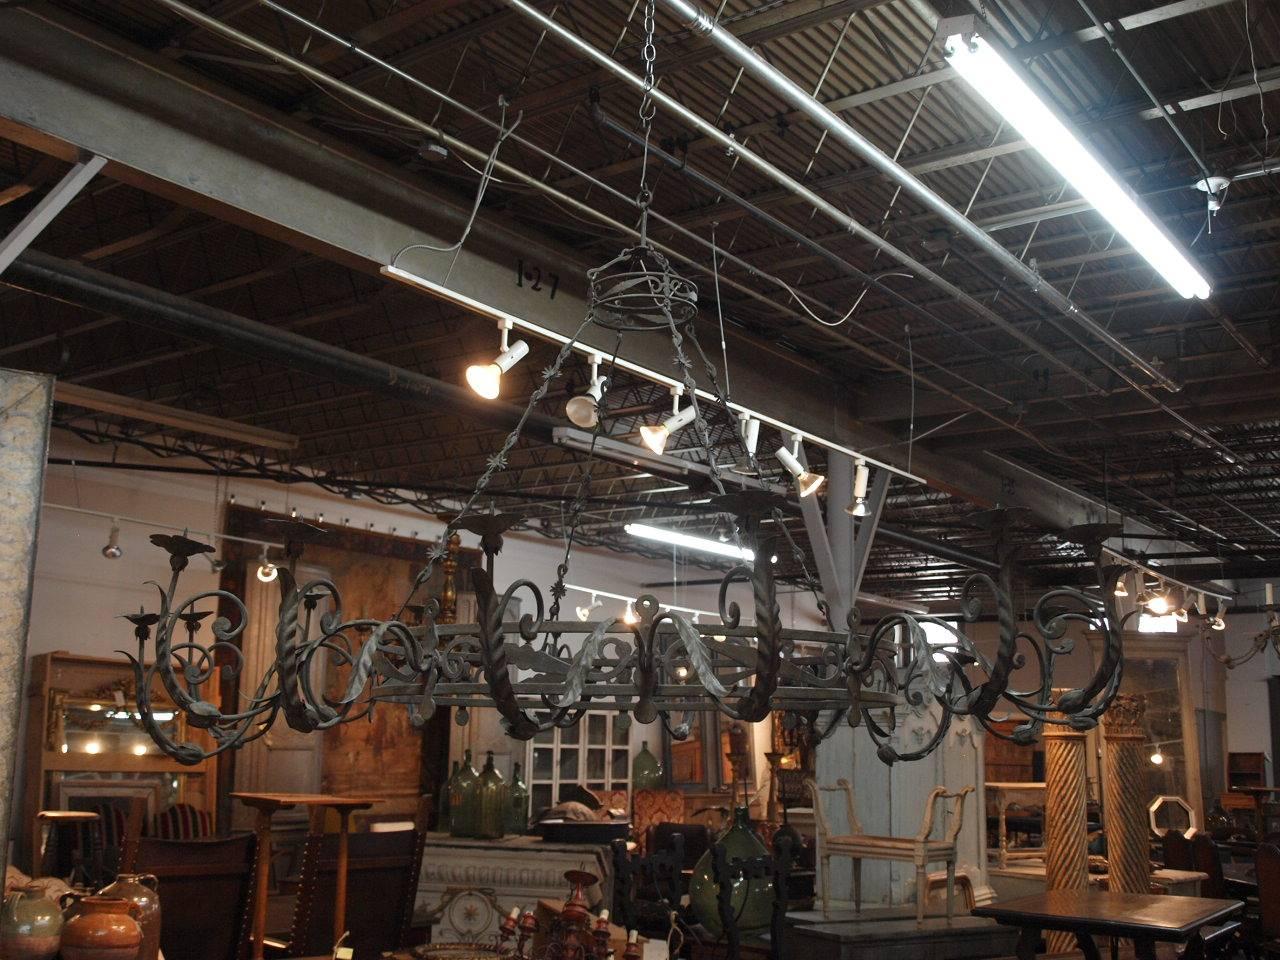 An outstanding and monumental pair of early 19th century chandeliers from Northern Italy. These exceptional 16-arm fixtures are expertly crafted in forged iron with scrolling acanthus leaves and stunning chains. Please note the hand written conto-or